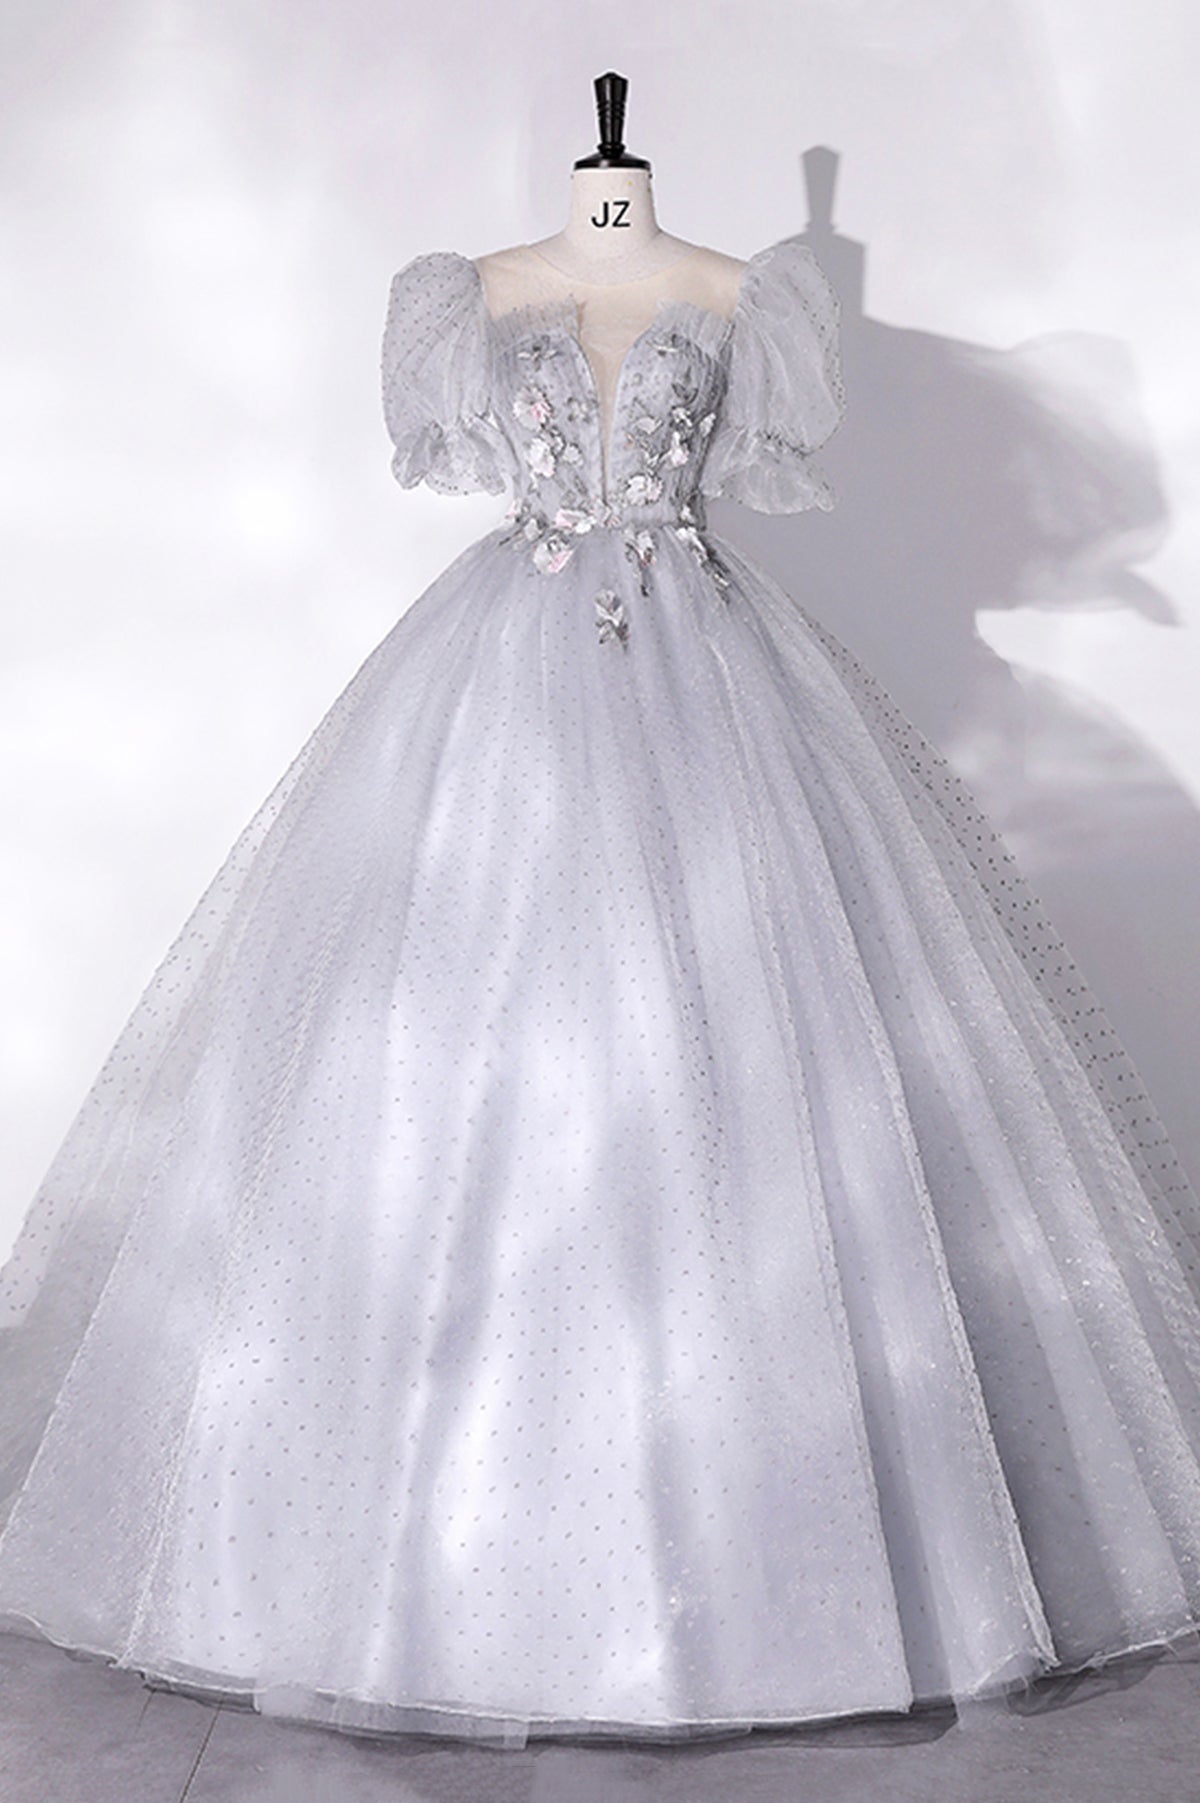 Gray Tulle Long A-Line Ball Gown, Gray Short Sleeve Evening Gown